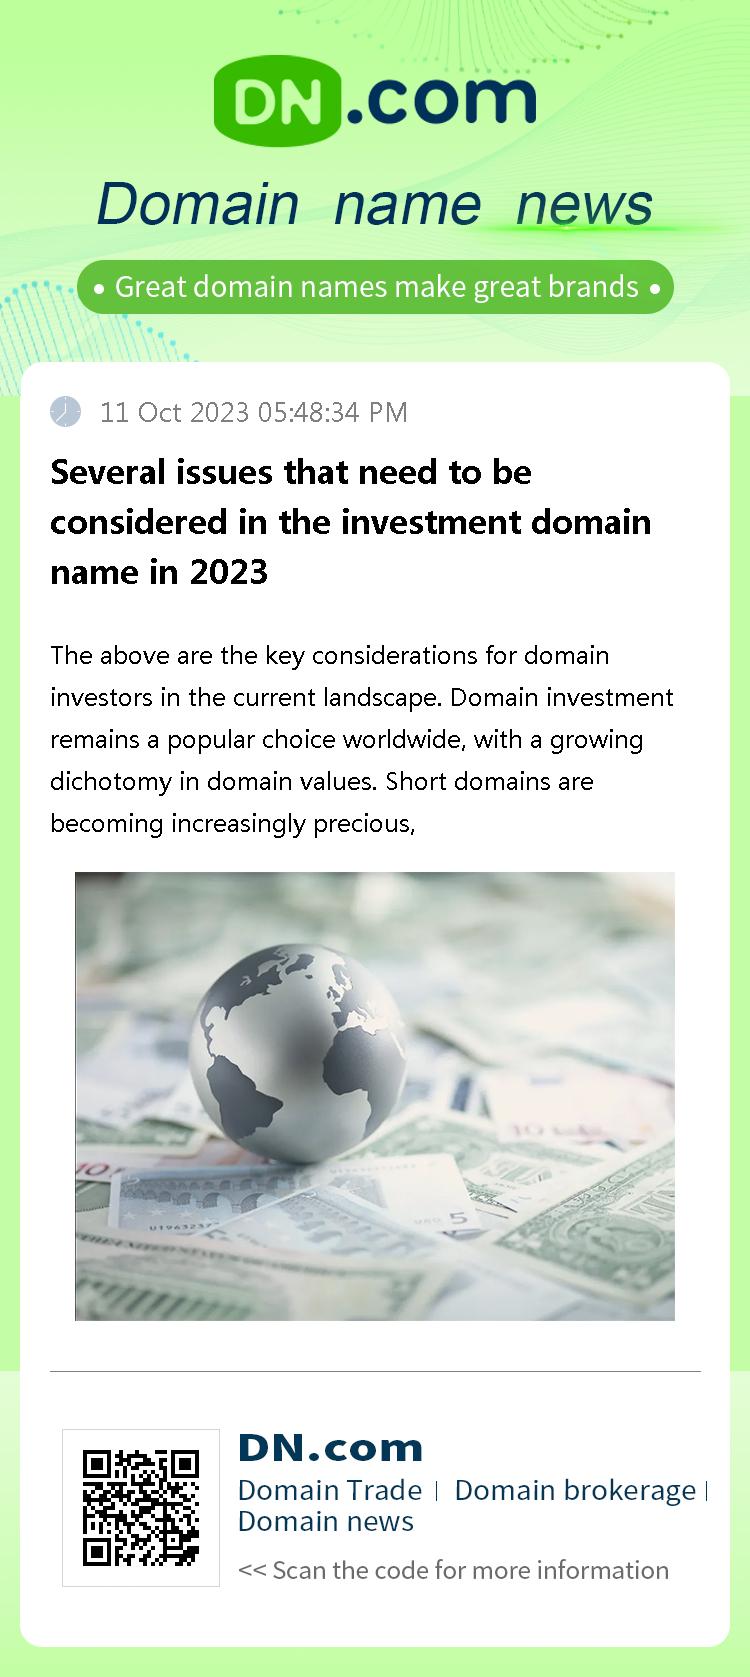 Several issues that need to be considered in the investment domain name in 2023